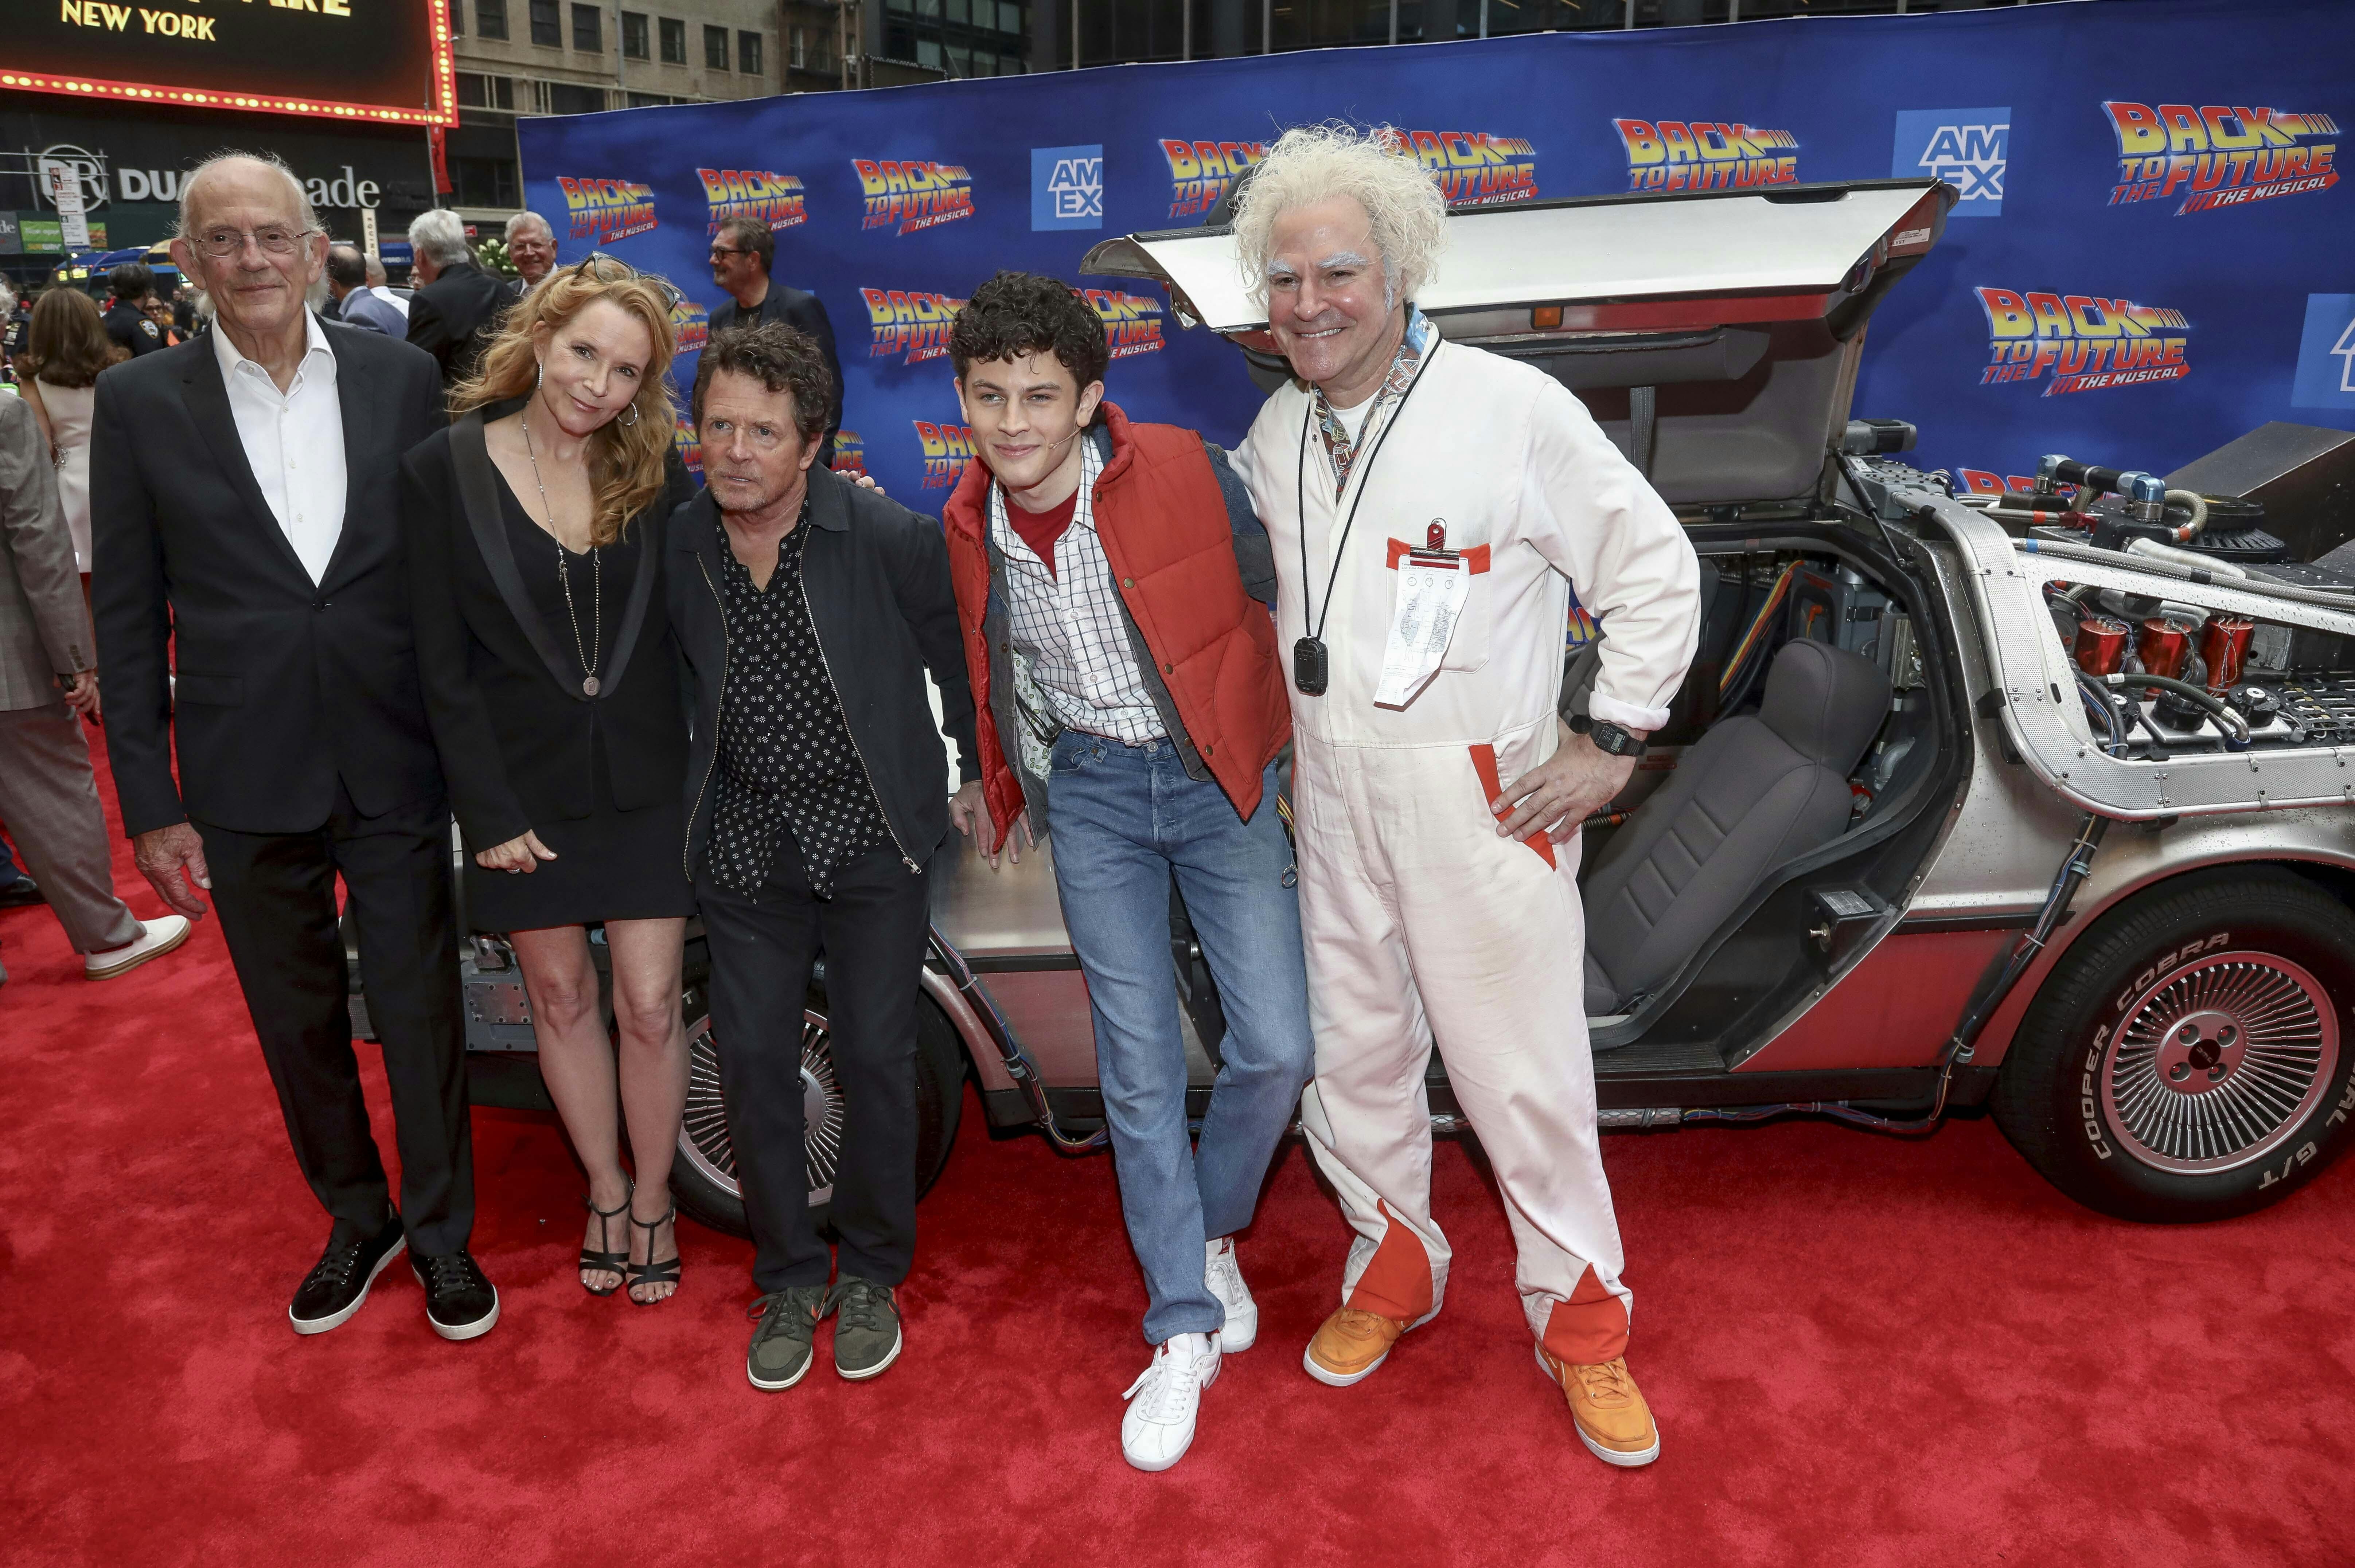 Actors Christopher Lloyd, from left, Lea Thompson, Michael J. Fox, Casey Likes and Roger Bart attend the "Back to the Future: The Musical" Broadway opening at the Winter Garden Theatre on Tuesday, July 25, 2023, in New York. (Photo by Andy Kropa/Invision/AP)